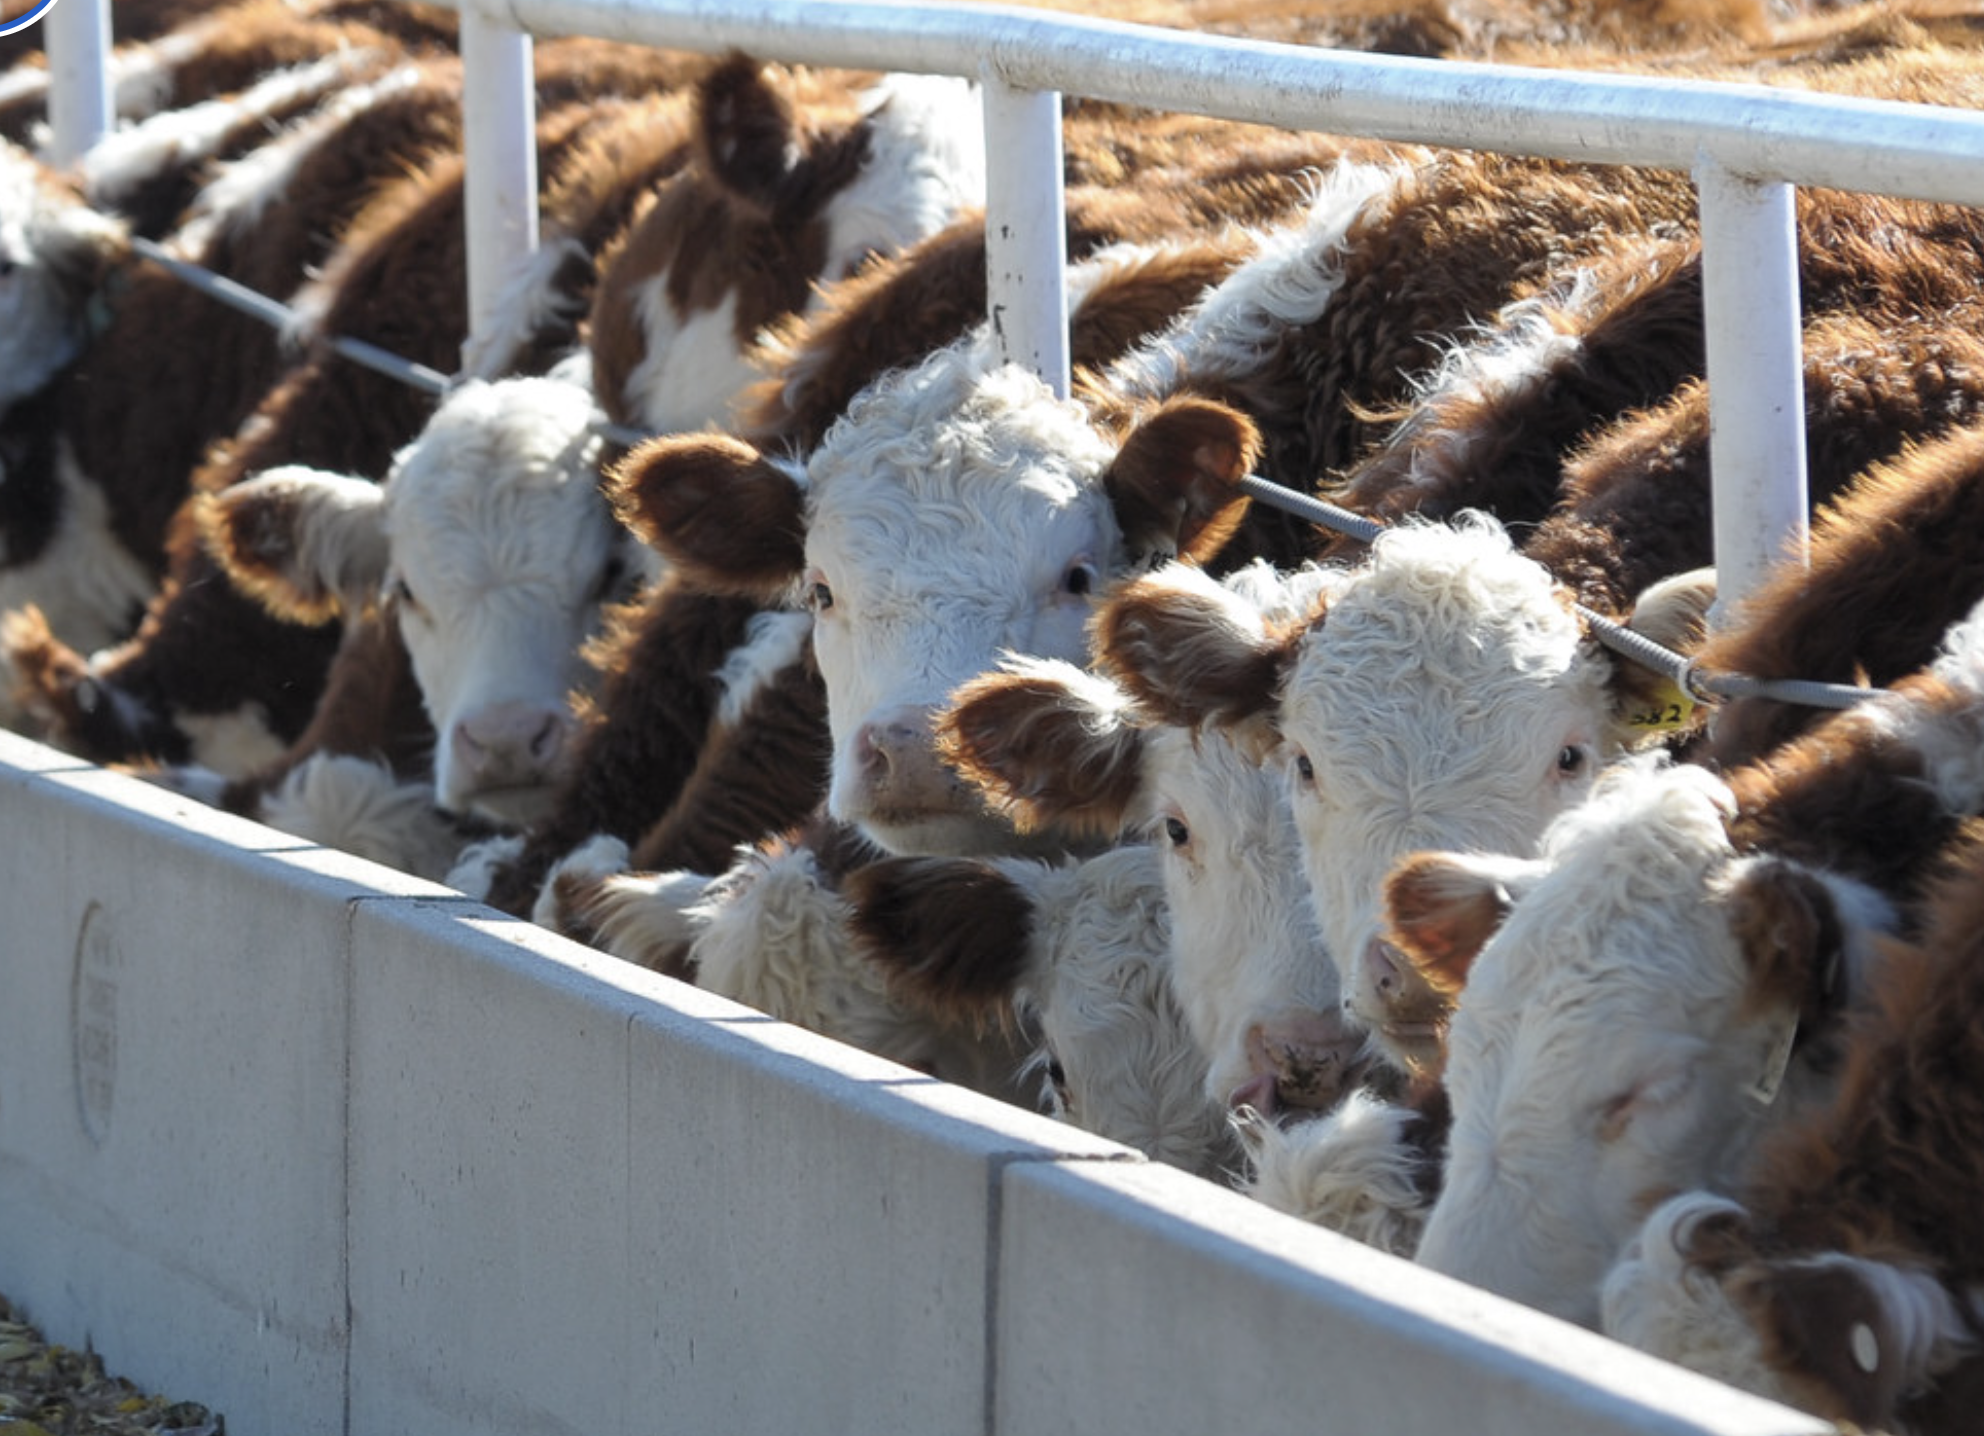 Cattle feedlot (CC BY 2.0)